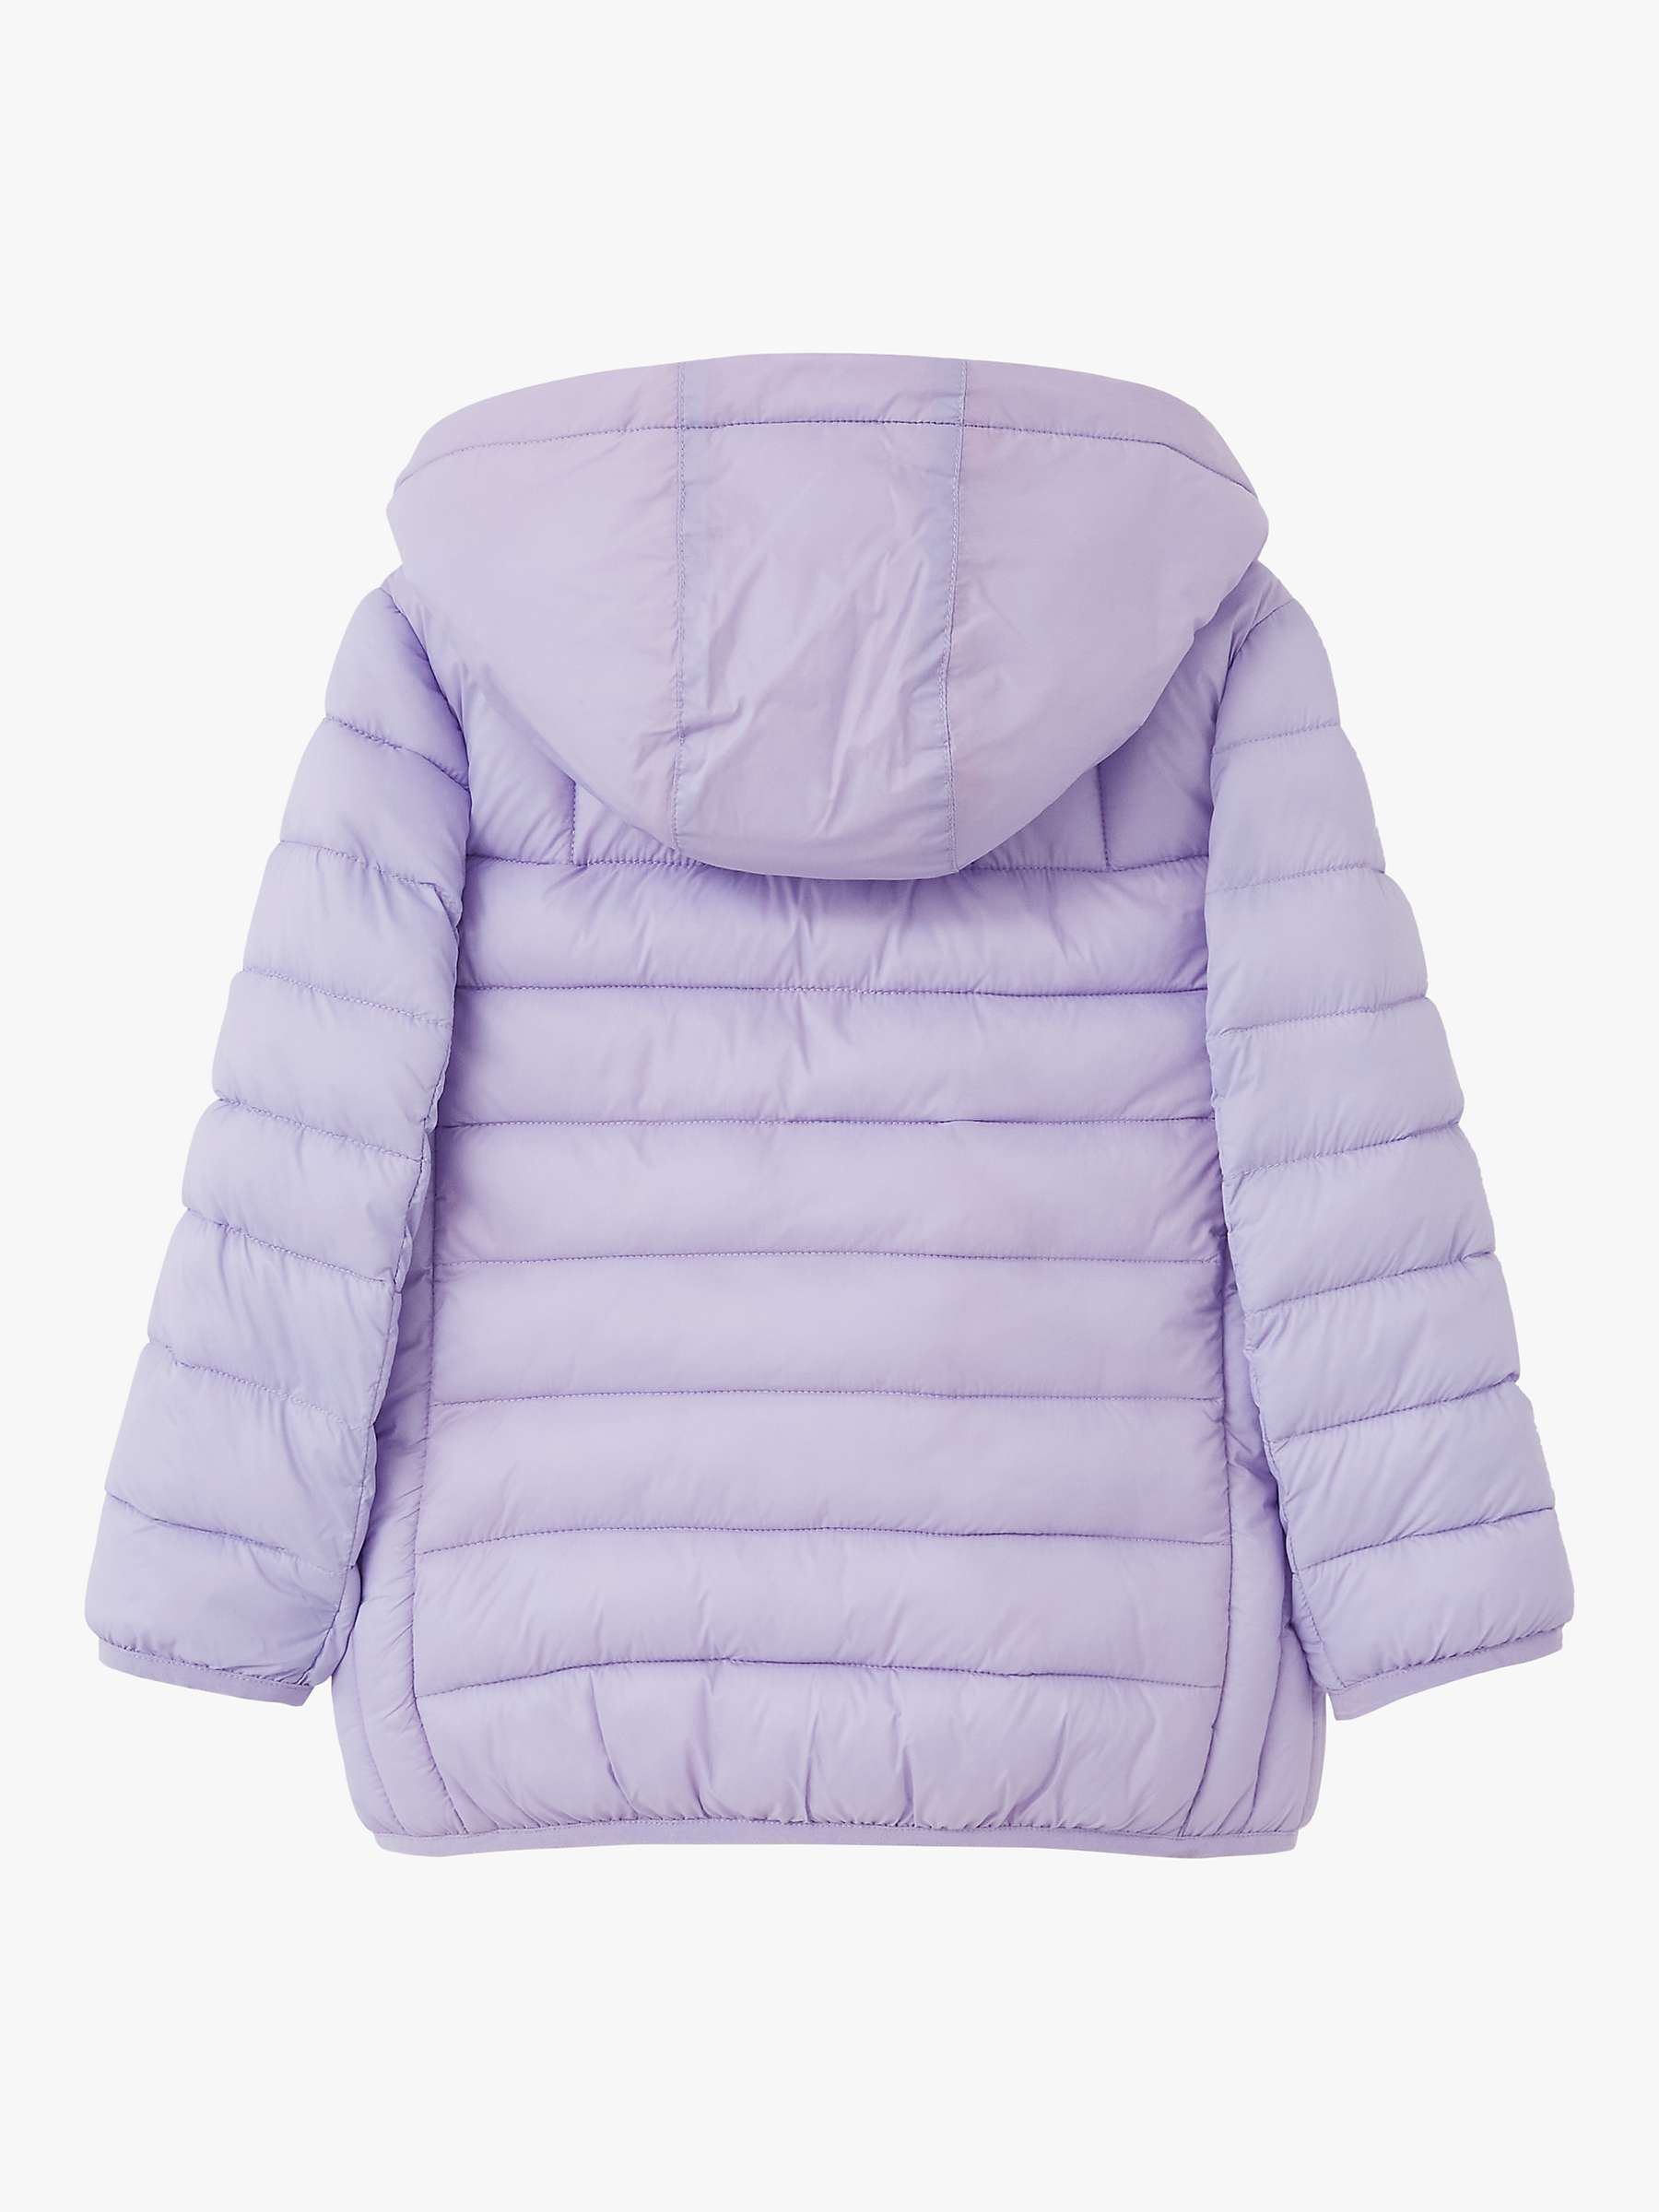 Crew Clothing Kids' Quilted Jacket, Lavender at John Lewis & Partners